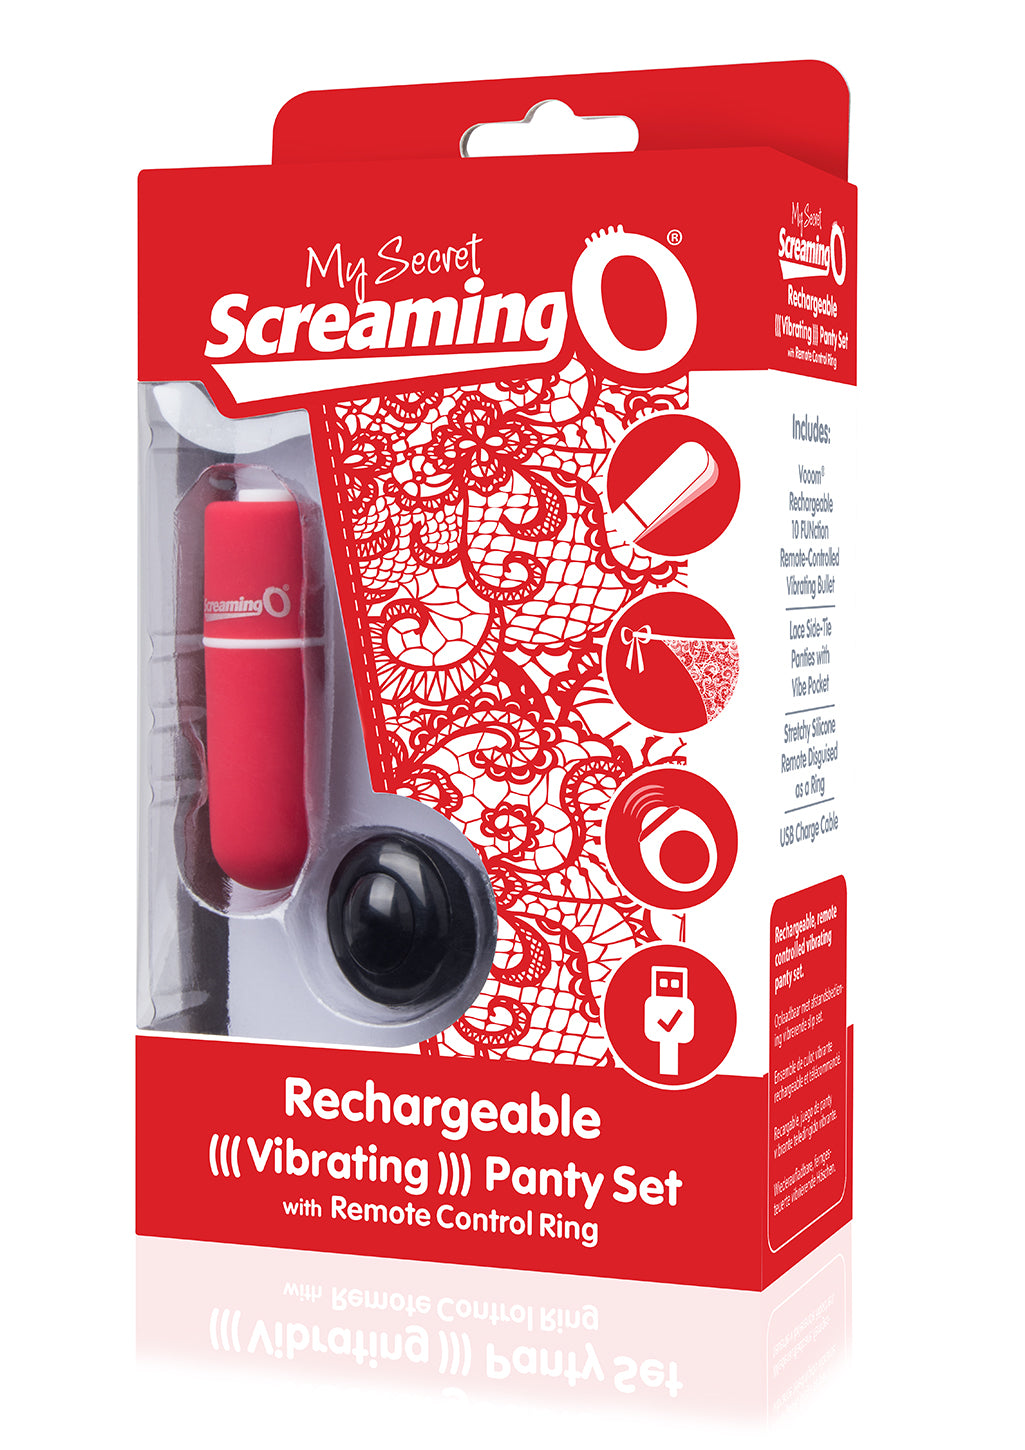 ScreamingO My Secret Charged Remote Control Panty